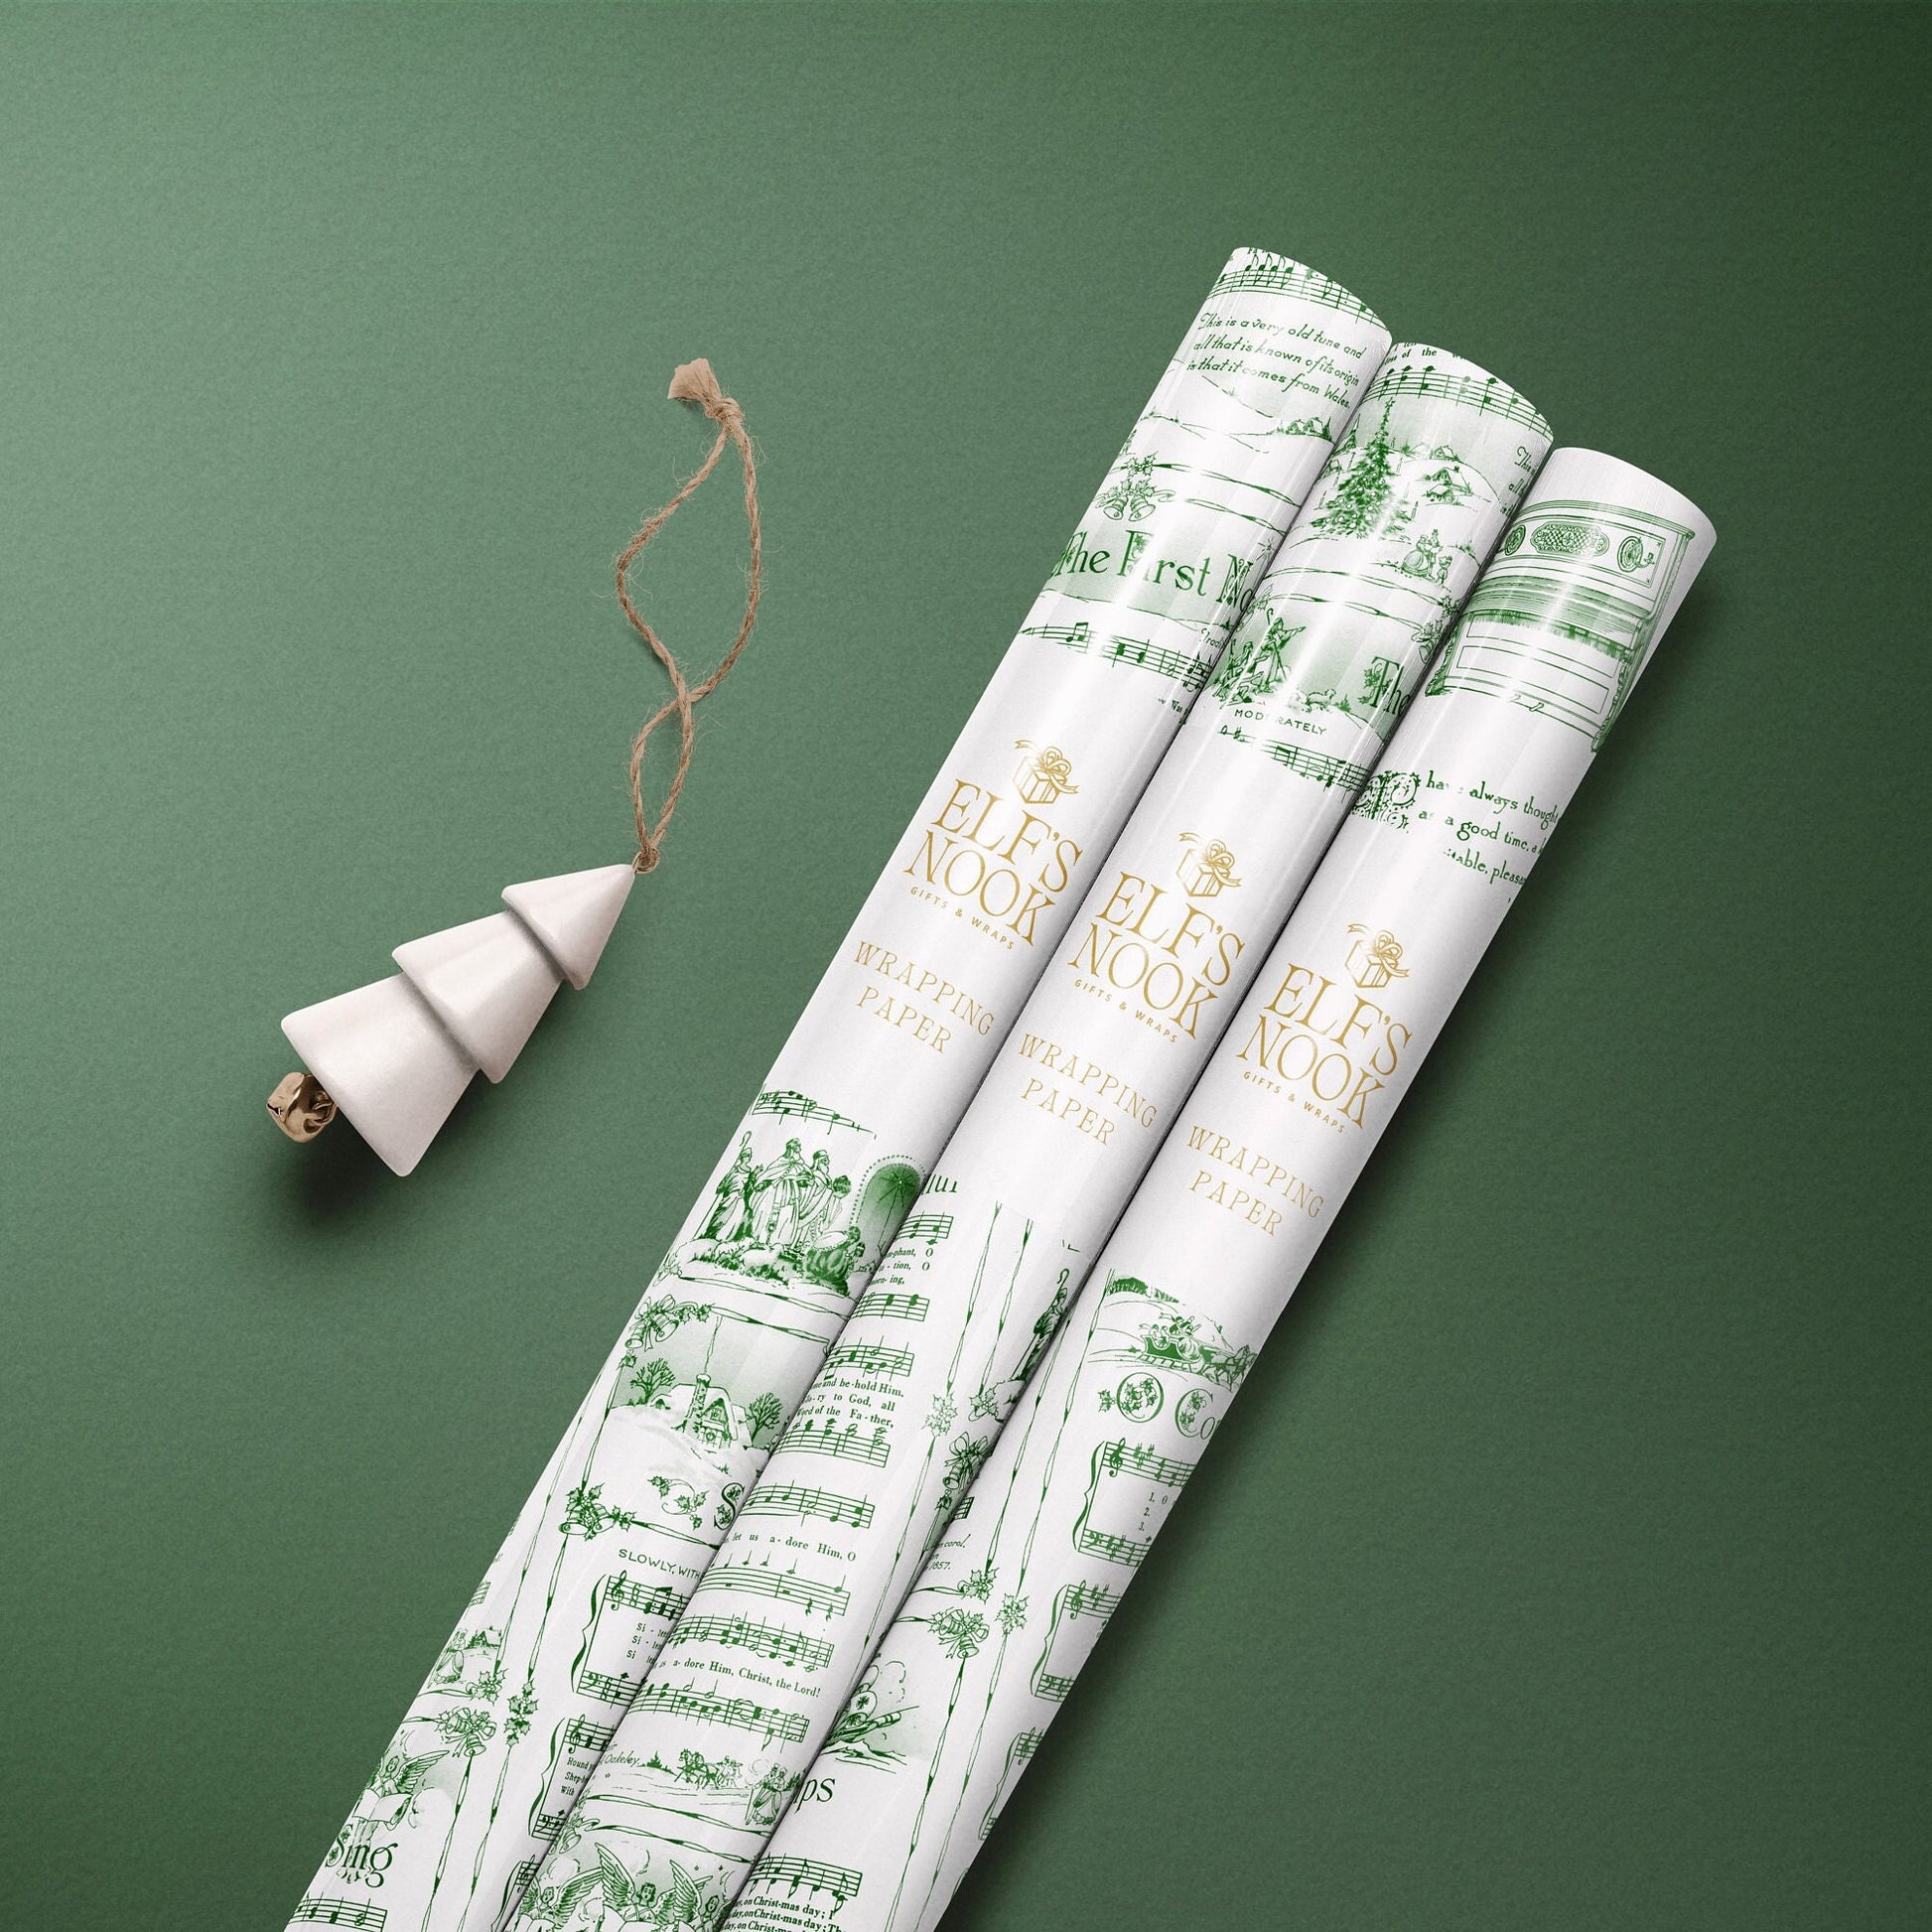 Christmas Carol Wrapping Paper Rolls